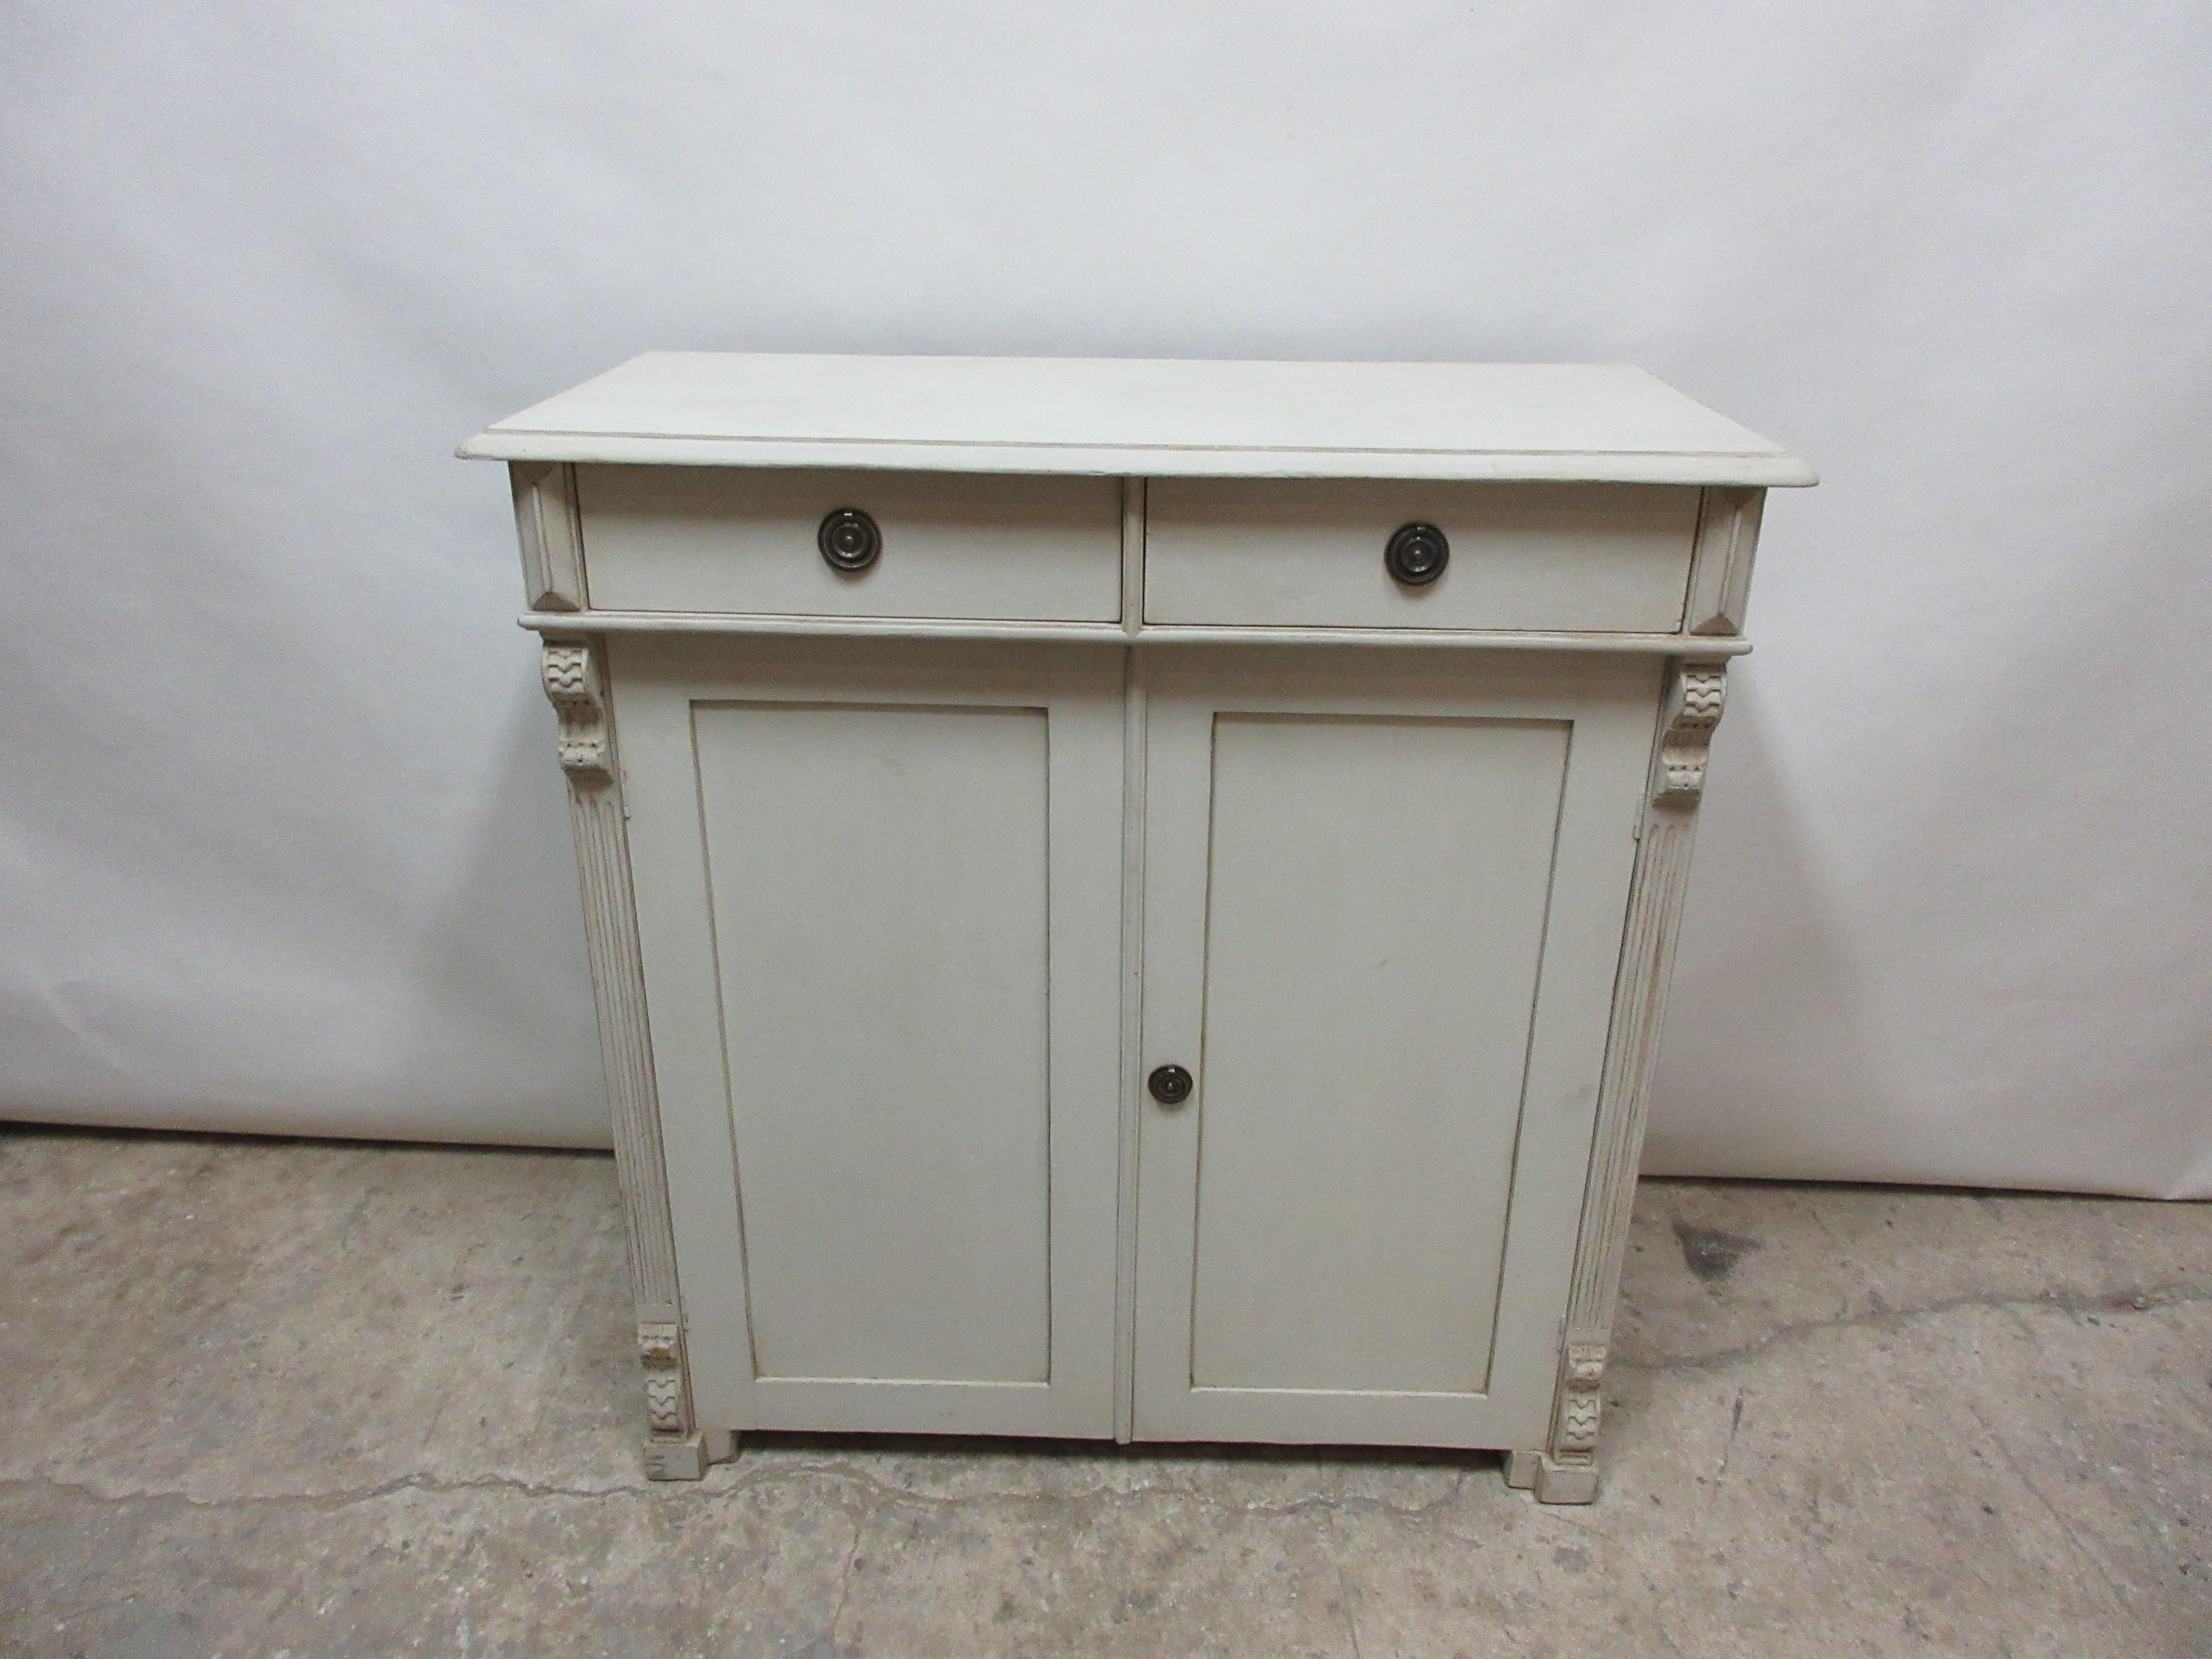 This is a Swedish jelly cupboard, it’s been restored and repainted with milk paints 